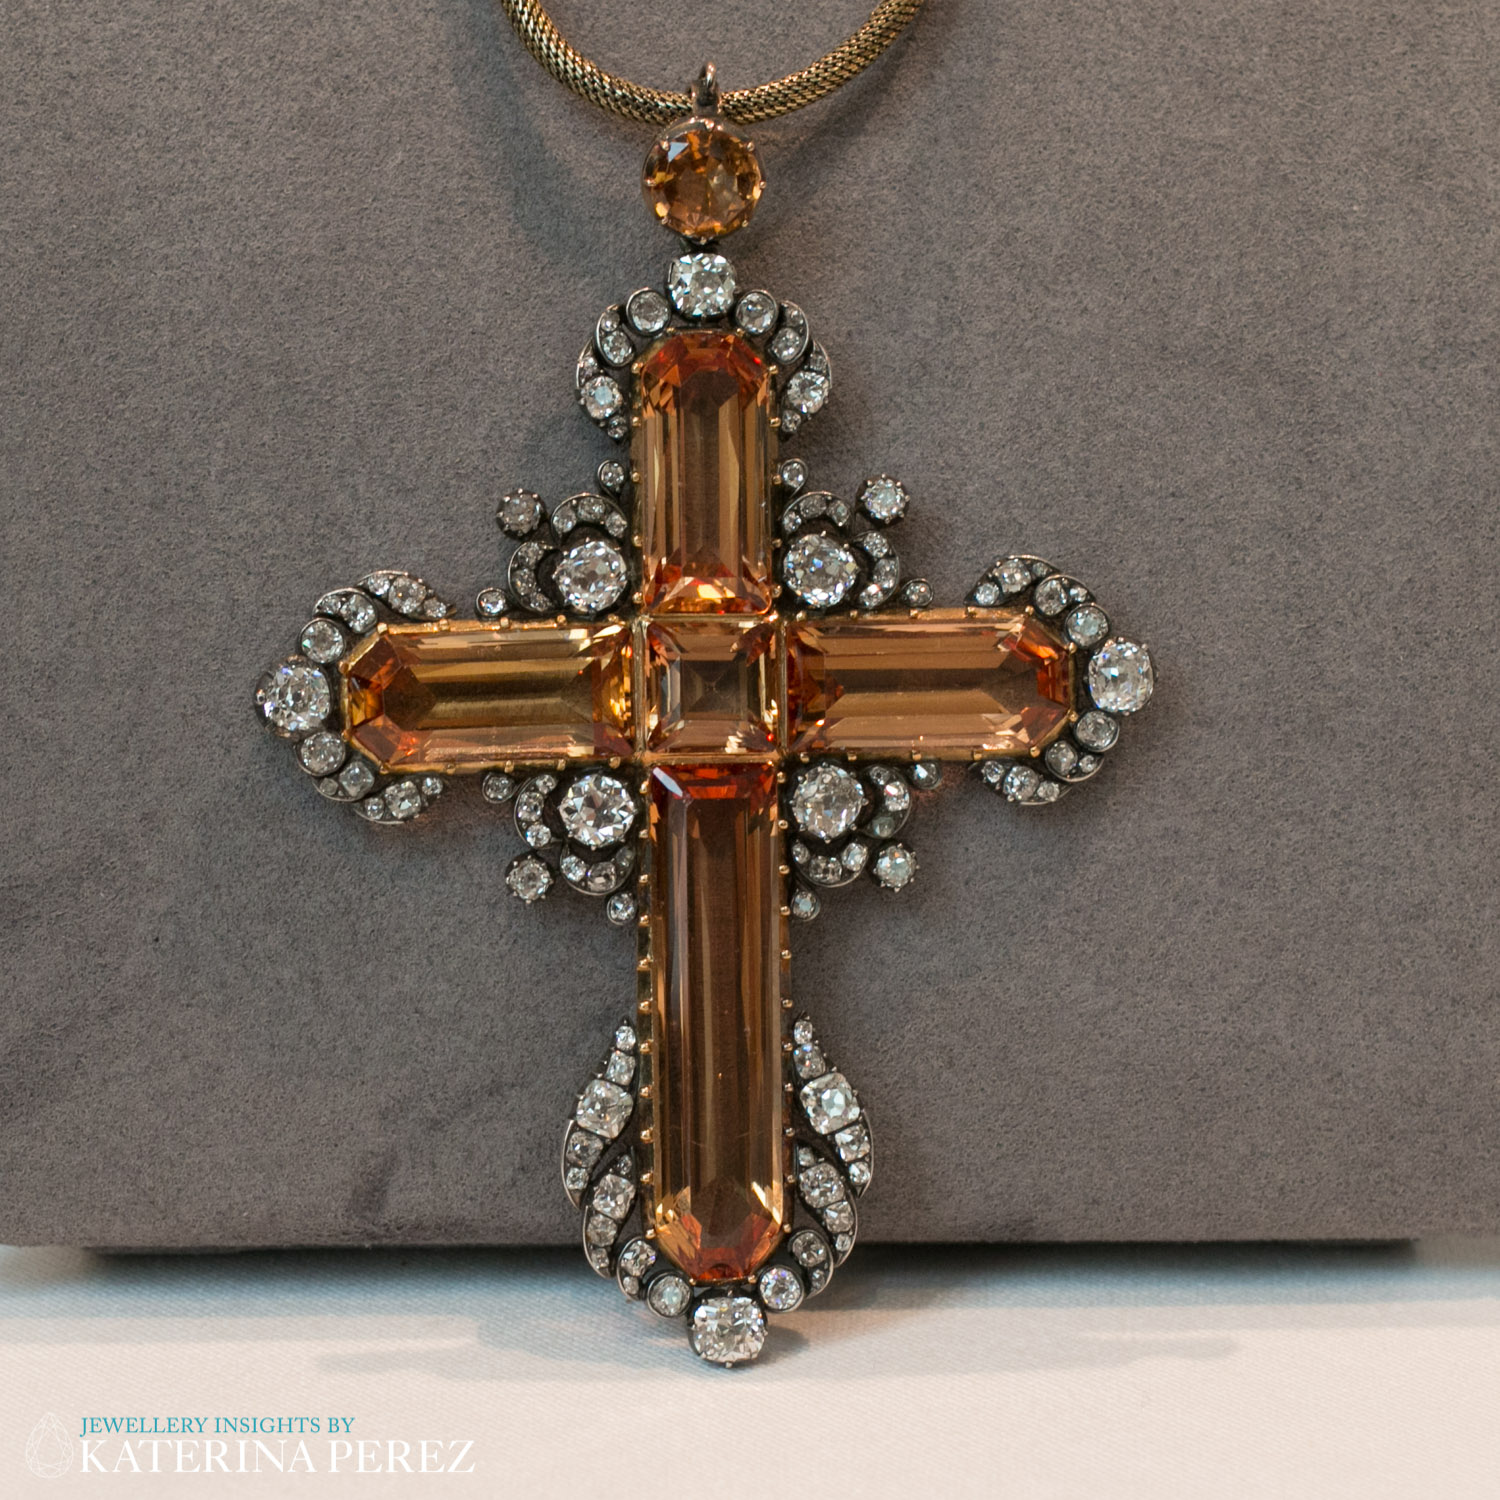 An Imperial Cross Pendant, Topaz and Diamond, circa 1830. Circular-cut topaz with old brilliant and rose-cut diamonds, total 7.30 carats